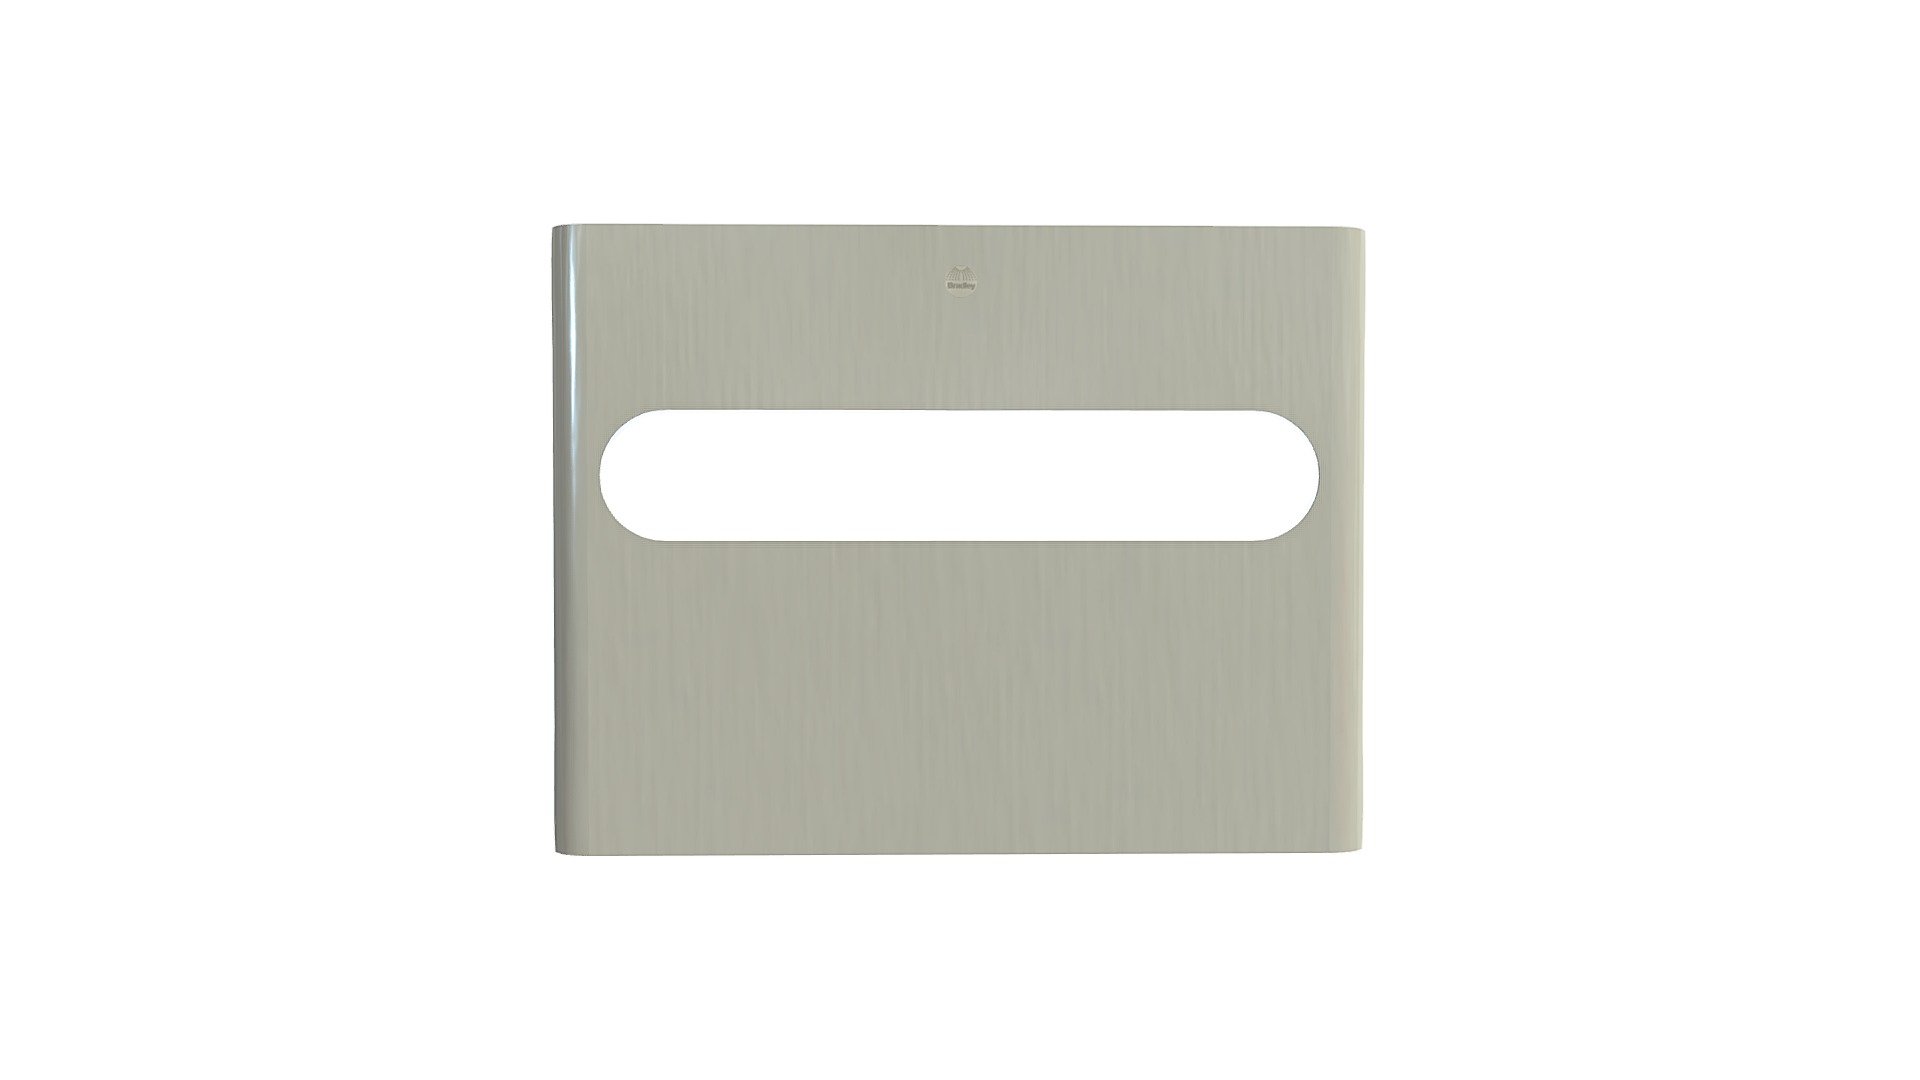 5B1-113600c Brushed-Nickel_E-Coat - 3D model by Render3DQuick [bfe5281 ...